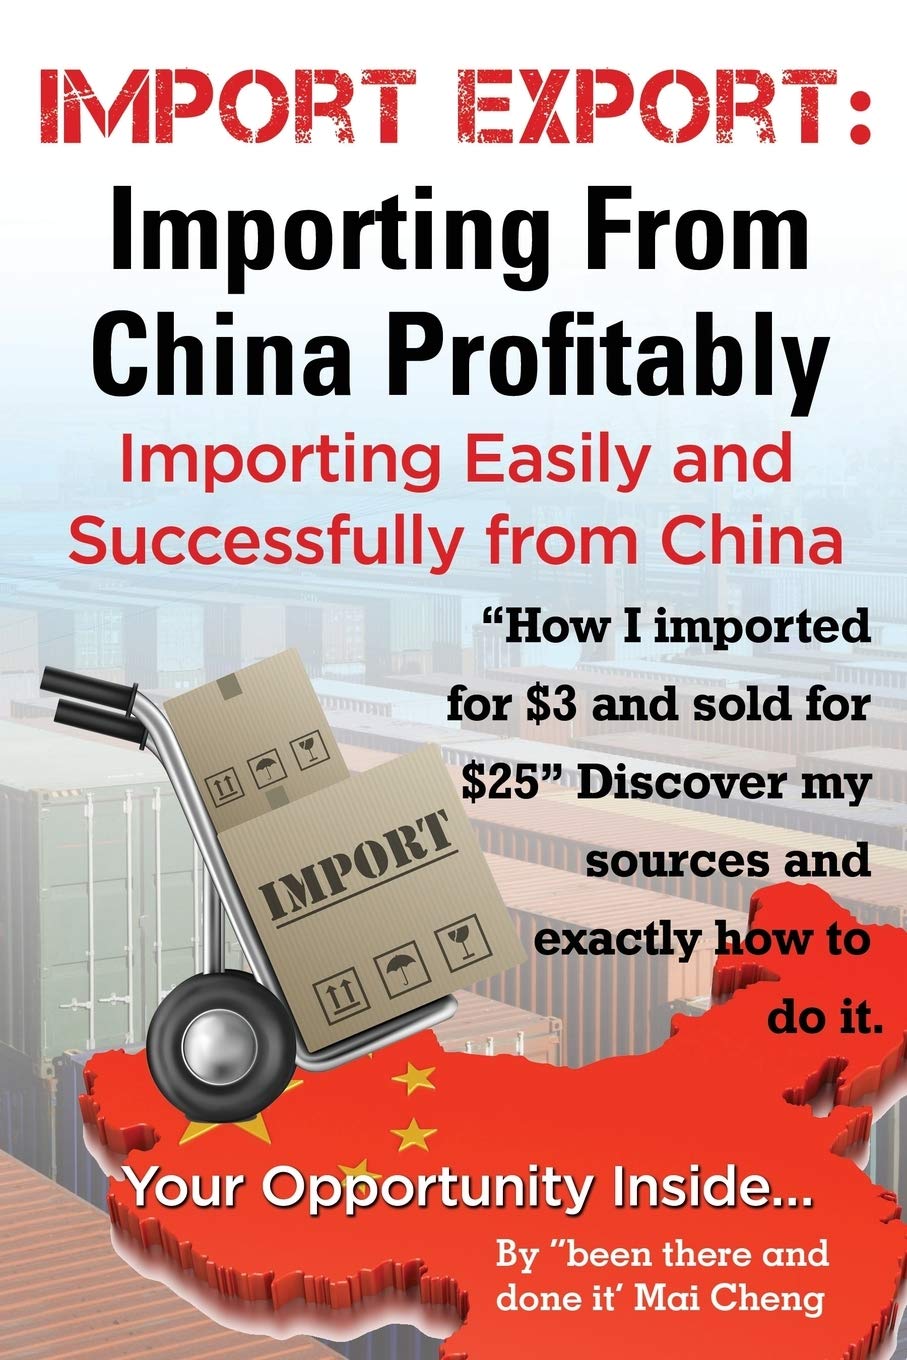 Import Export Importing from China Easily and Successfully - SureShot Books Publishing LLC